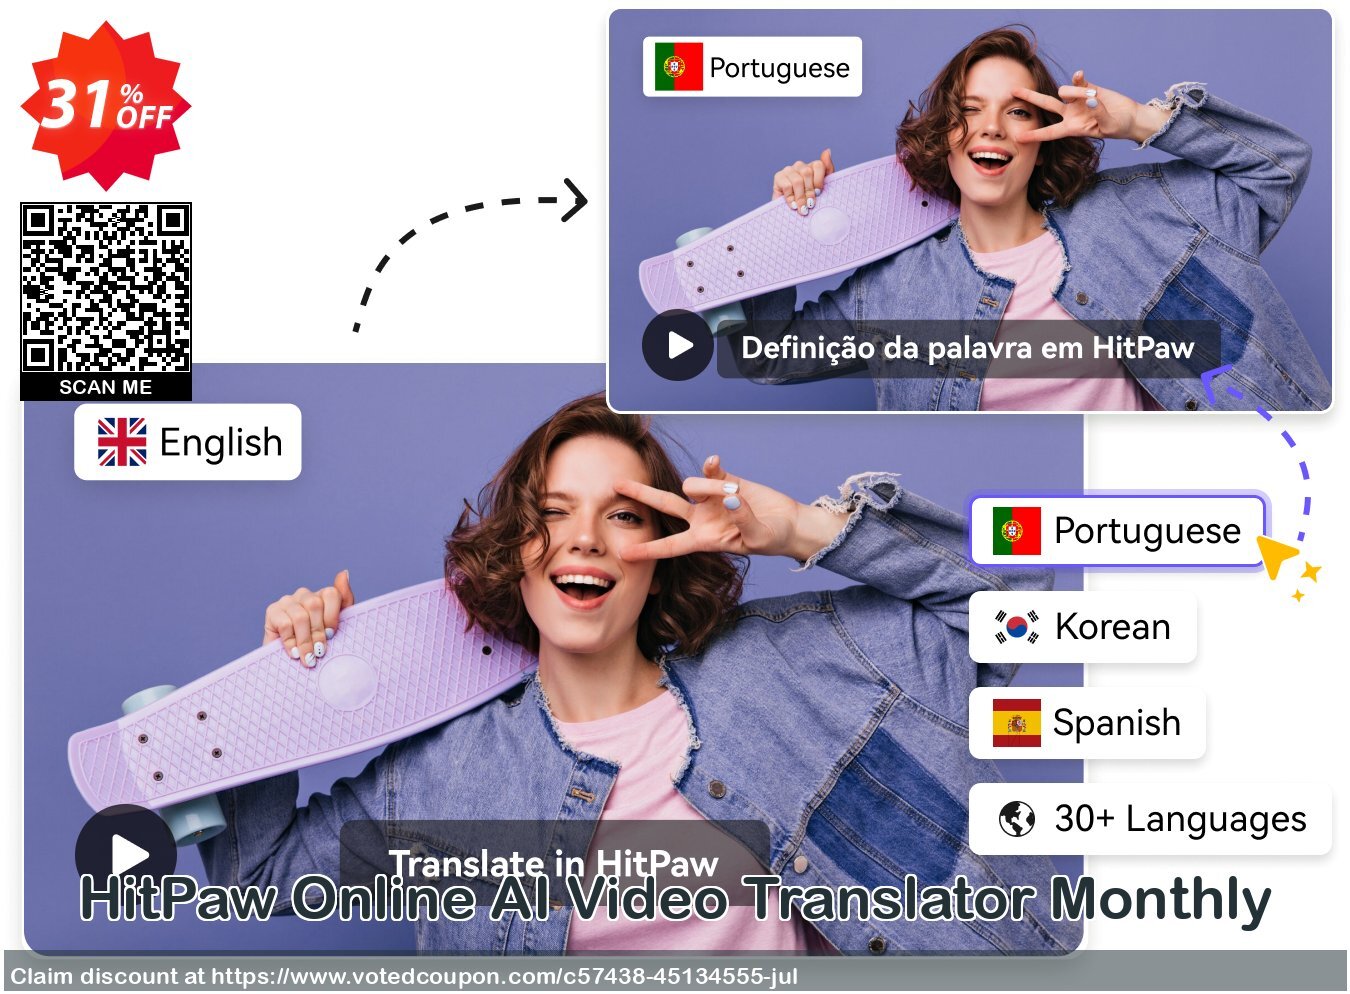 HitPaw Online AI Video Translator Monthly voted-on promotion codes